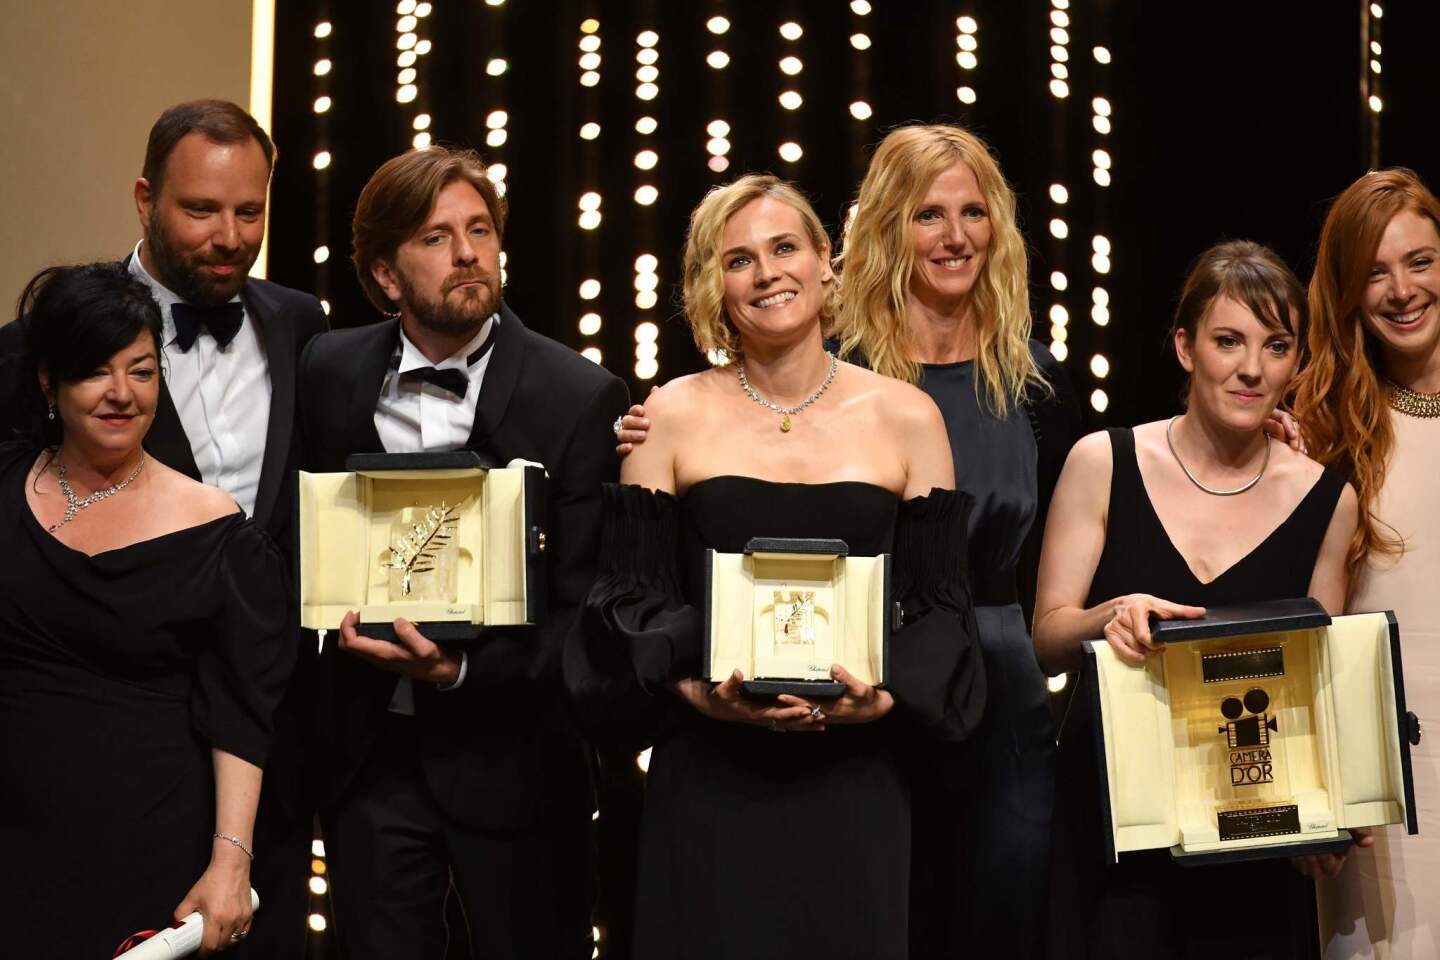 Best screenplay co-laureates directors Lynne Ramsay and director Yorgos Lanthimos, Palme d'Or laureate director Ruben Ostlund, best actress prize laureate Diane Kruger, actress and President of the Camera d'Or jury Sandrine Kiberlain, Camera d'Or laureate director Leonor Serraille and actress Laetiti Dosch pose on stage at the end of the closing ceremony.